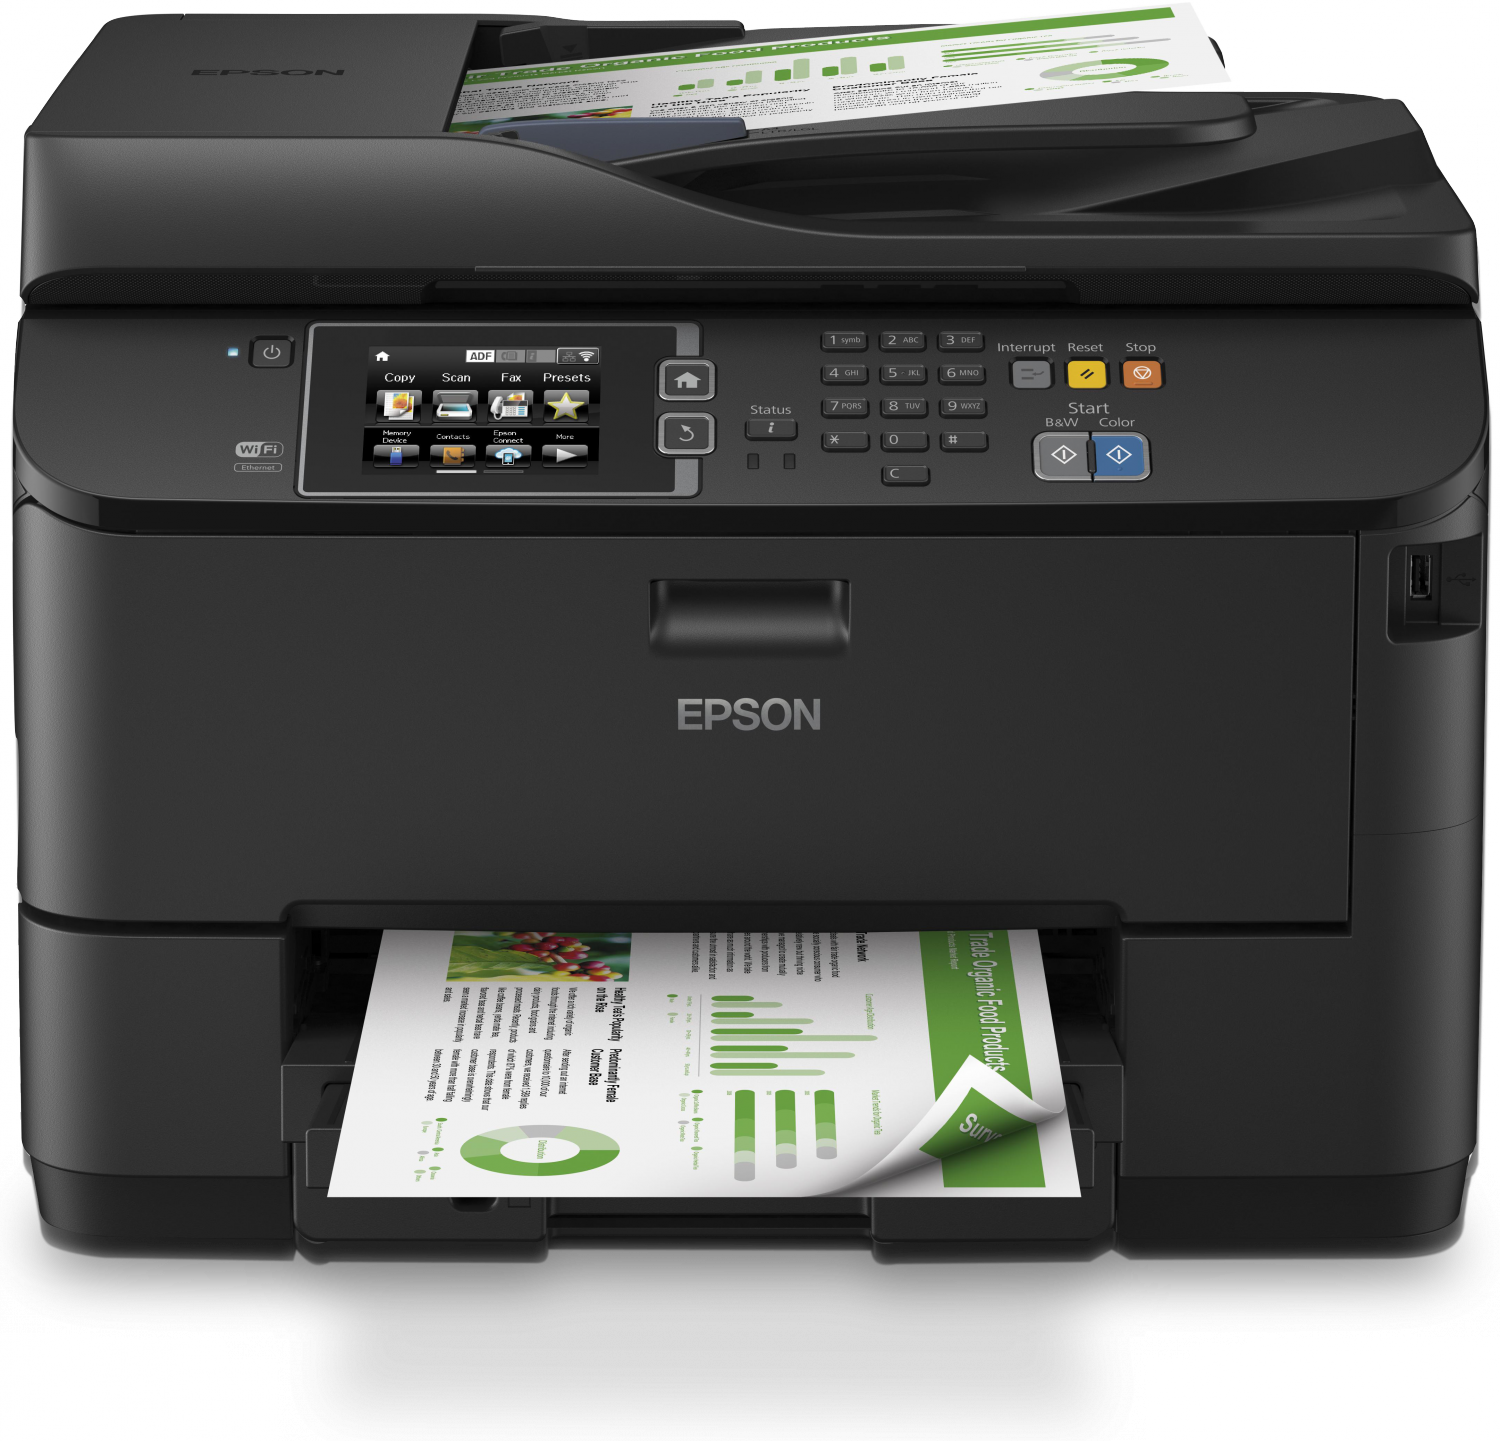 Driver Epson WF-4630 Ubuntu 18.04 How to Download and Install - Featured